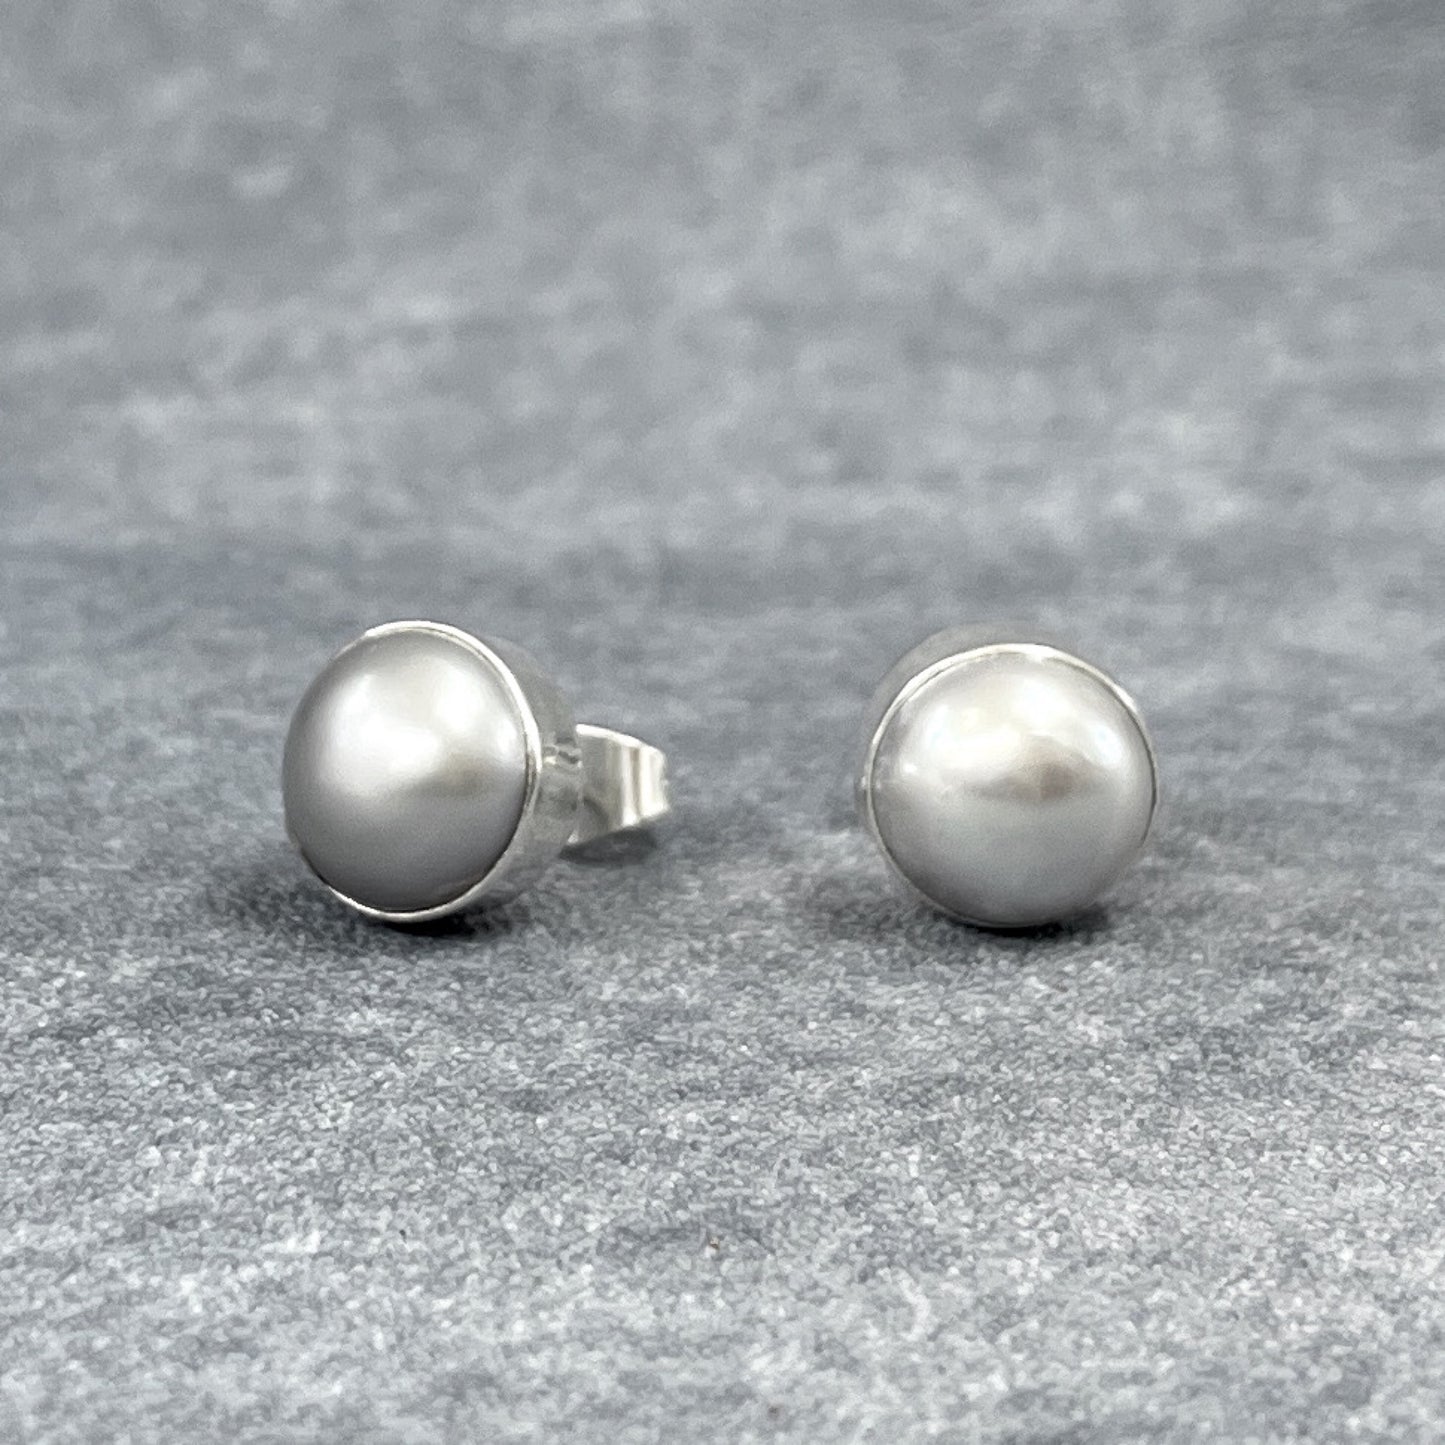 Pearla - Mounted Gray Pearl Silver Earrings - Stud Curated and designed by Emilio Sotelo Jewelry for Croi Kinsale Jewellery in Kinsale West Cork Ireland Europe. Find exceptional handmade silver and gold jewellery at affordable prices for birthday gifts and Christmas presents. Handcrafted Silver jewelry. Find the best affordable jewellery